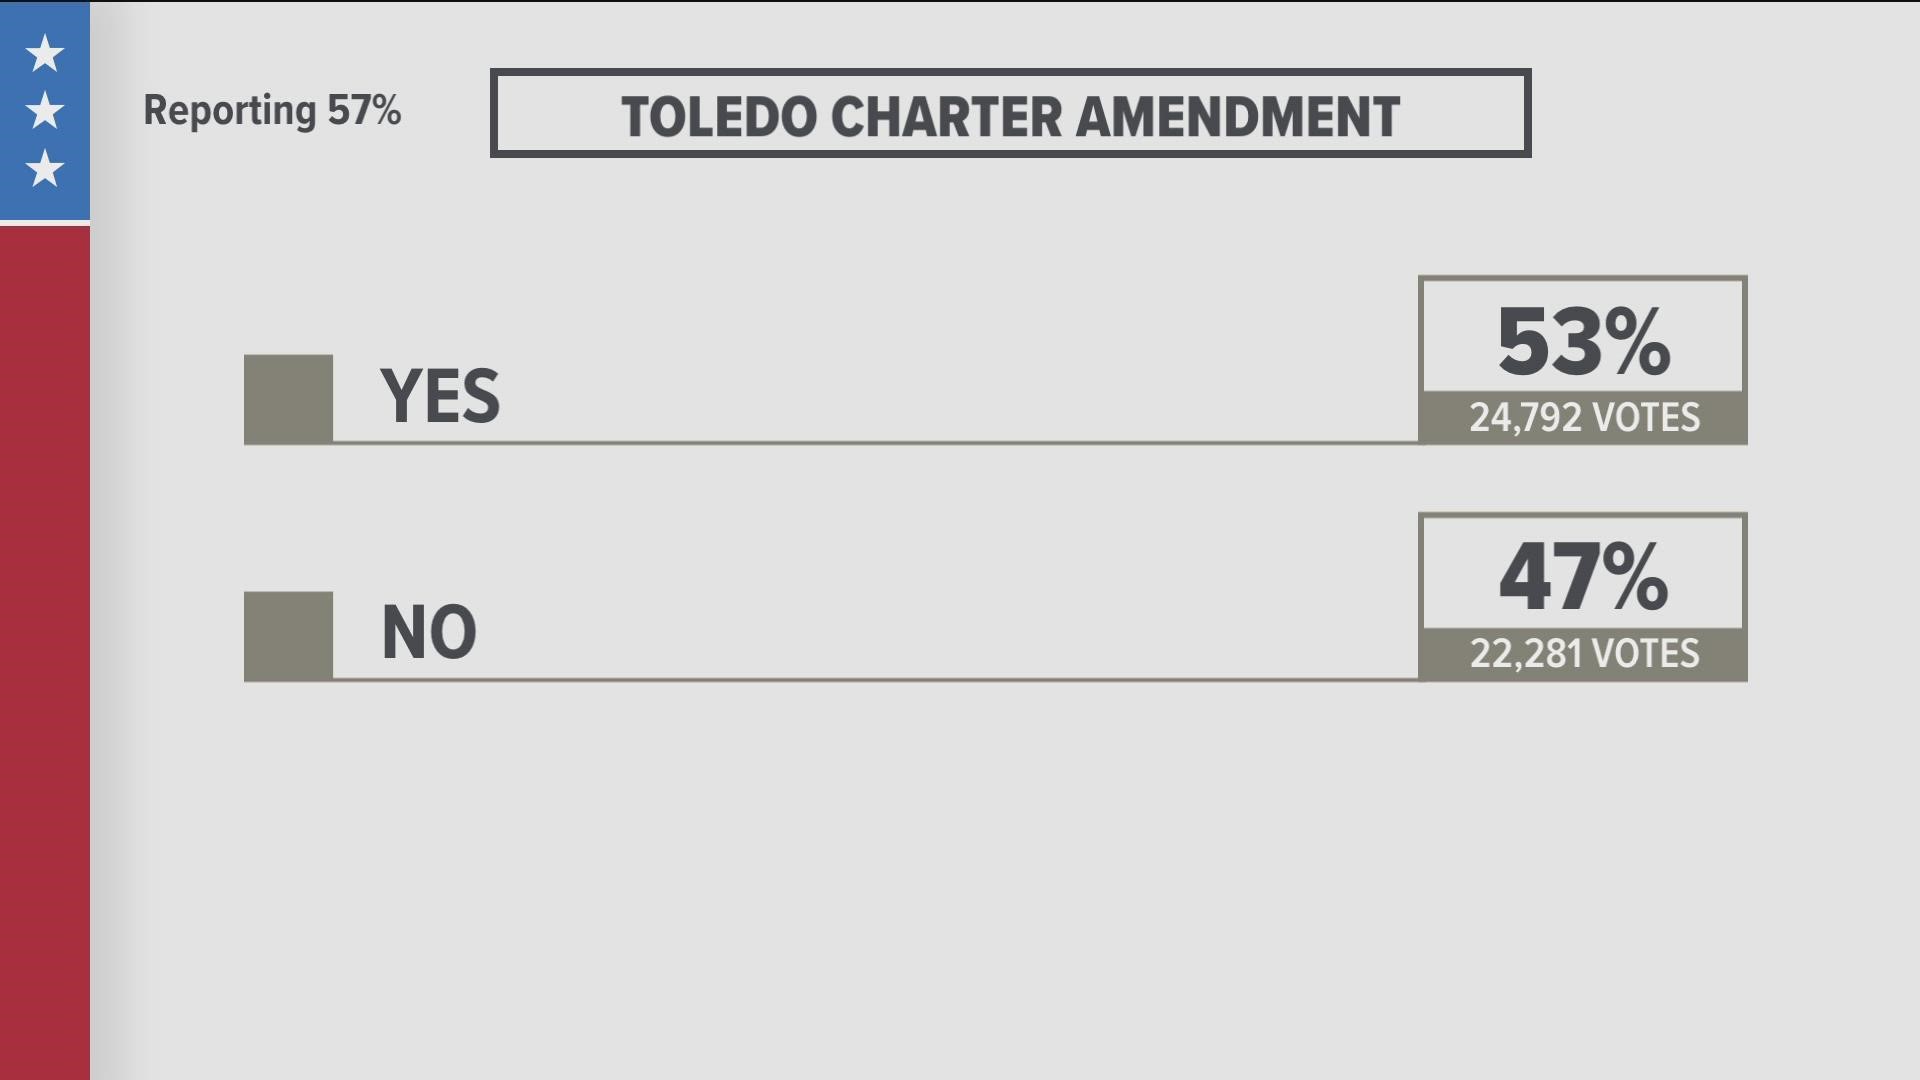 Toledo voters faced a ballot measure that would make many changes to the city charter, including allowing the mayor three terms in office.